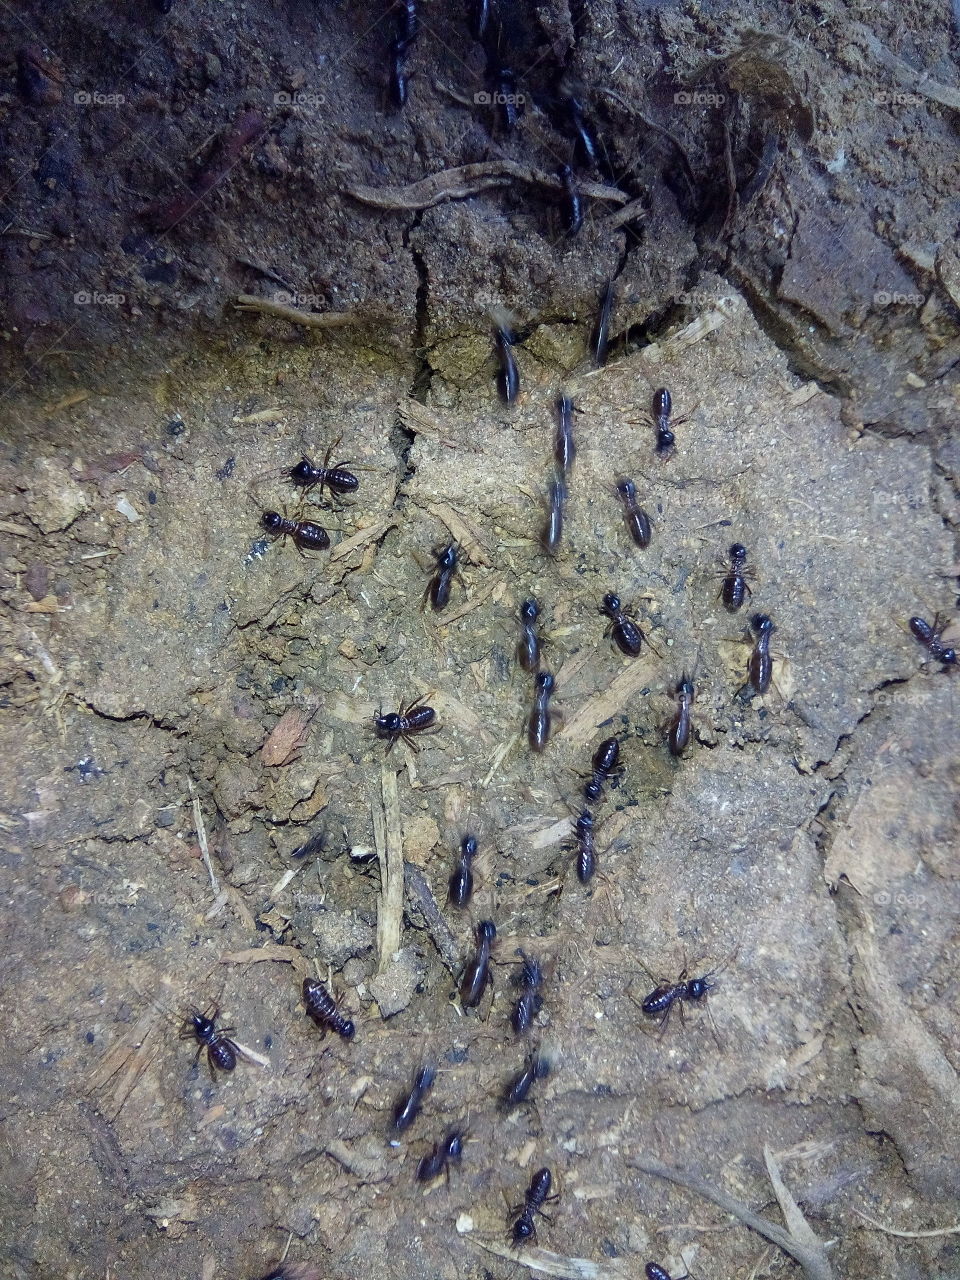 the battalion of ant